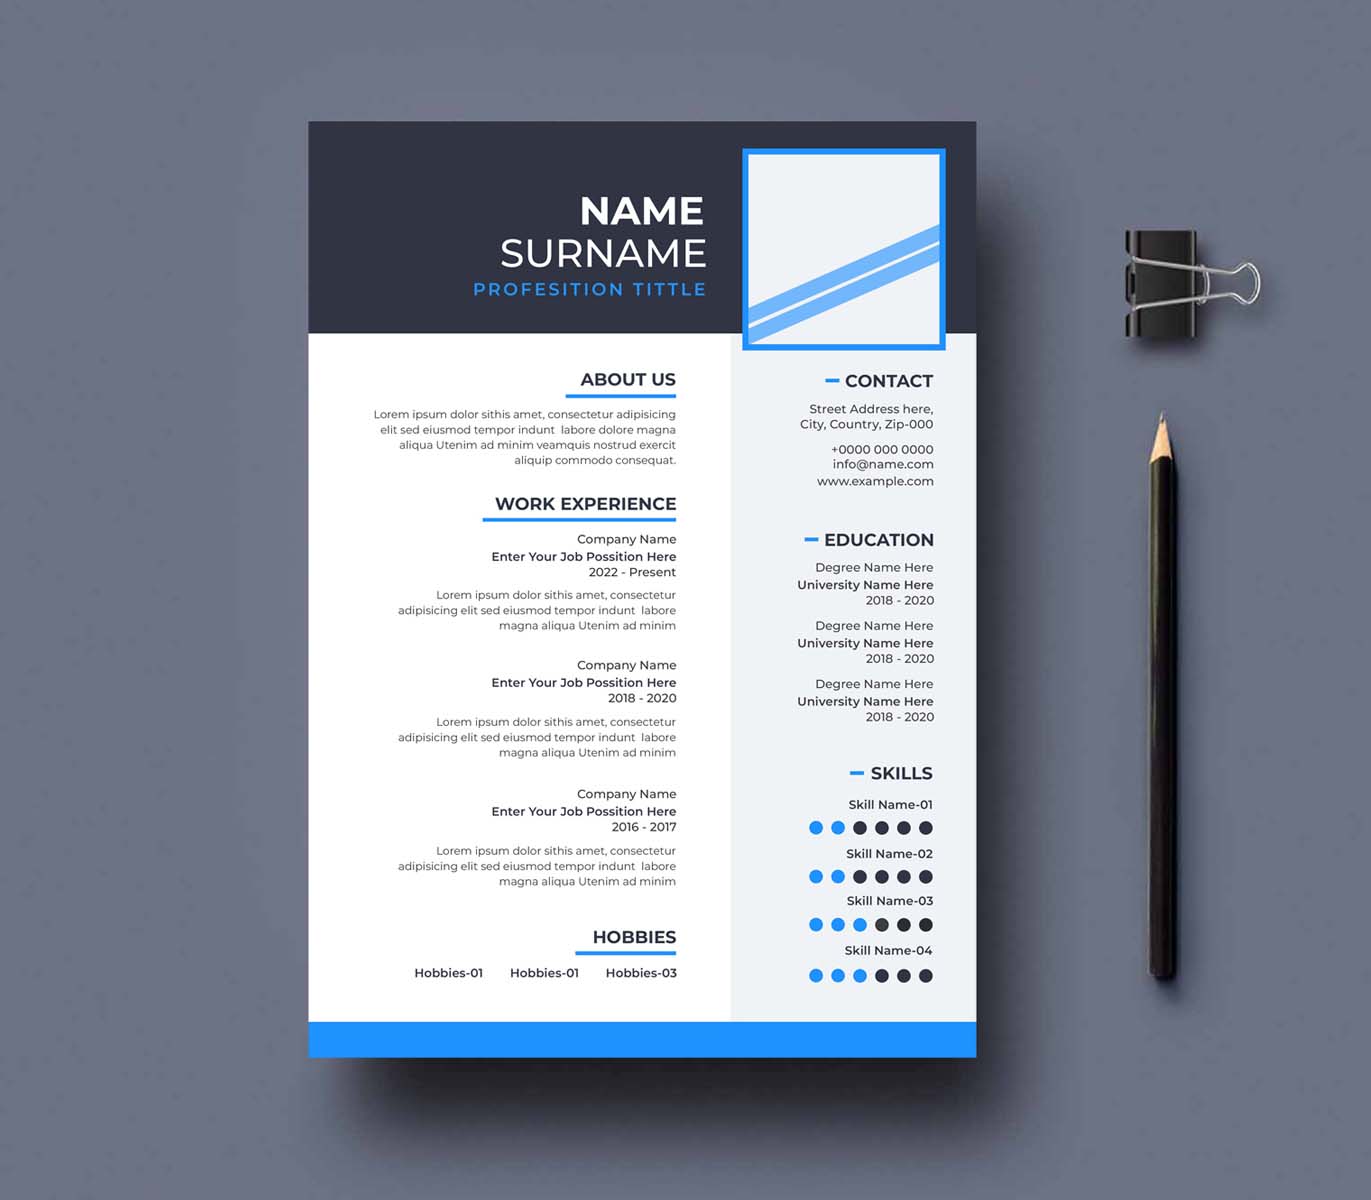 Blue and black resume template with a pencil.